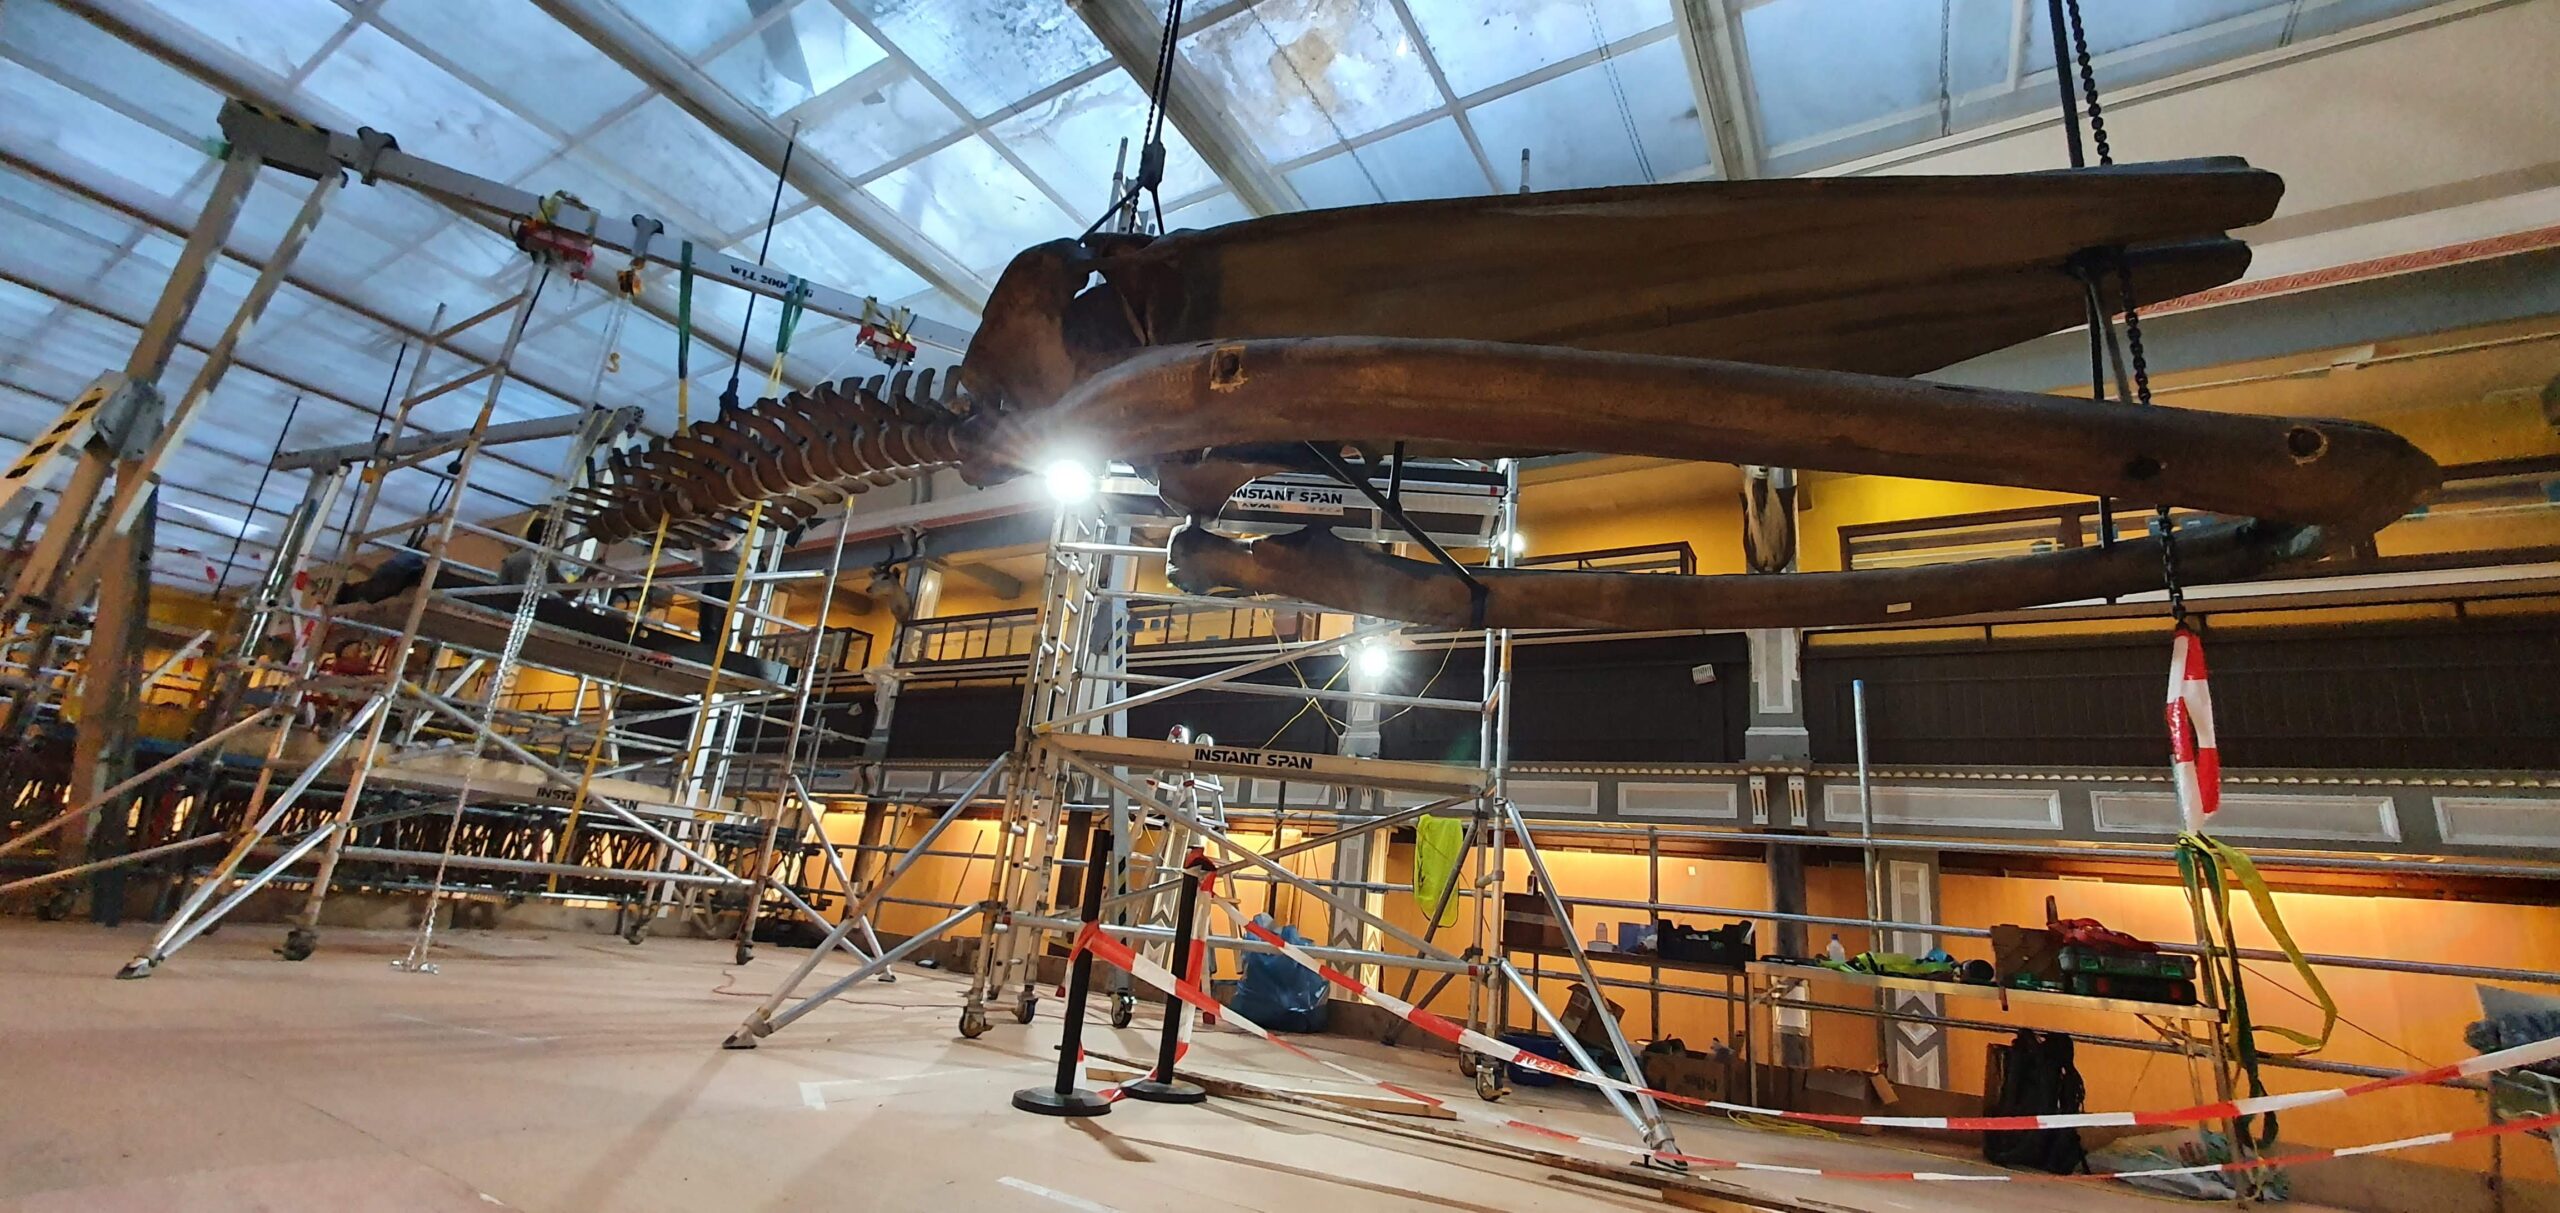 Large fin whale skeleton under the Victorian glass roof structure, with scaffolding surrounding it. 